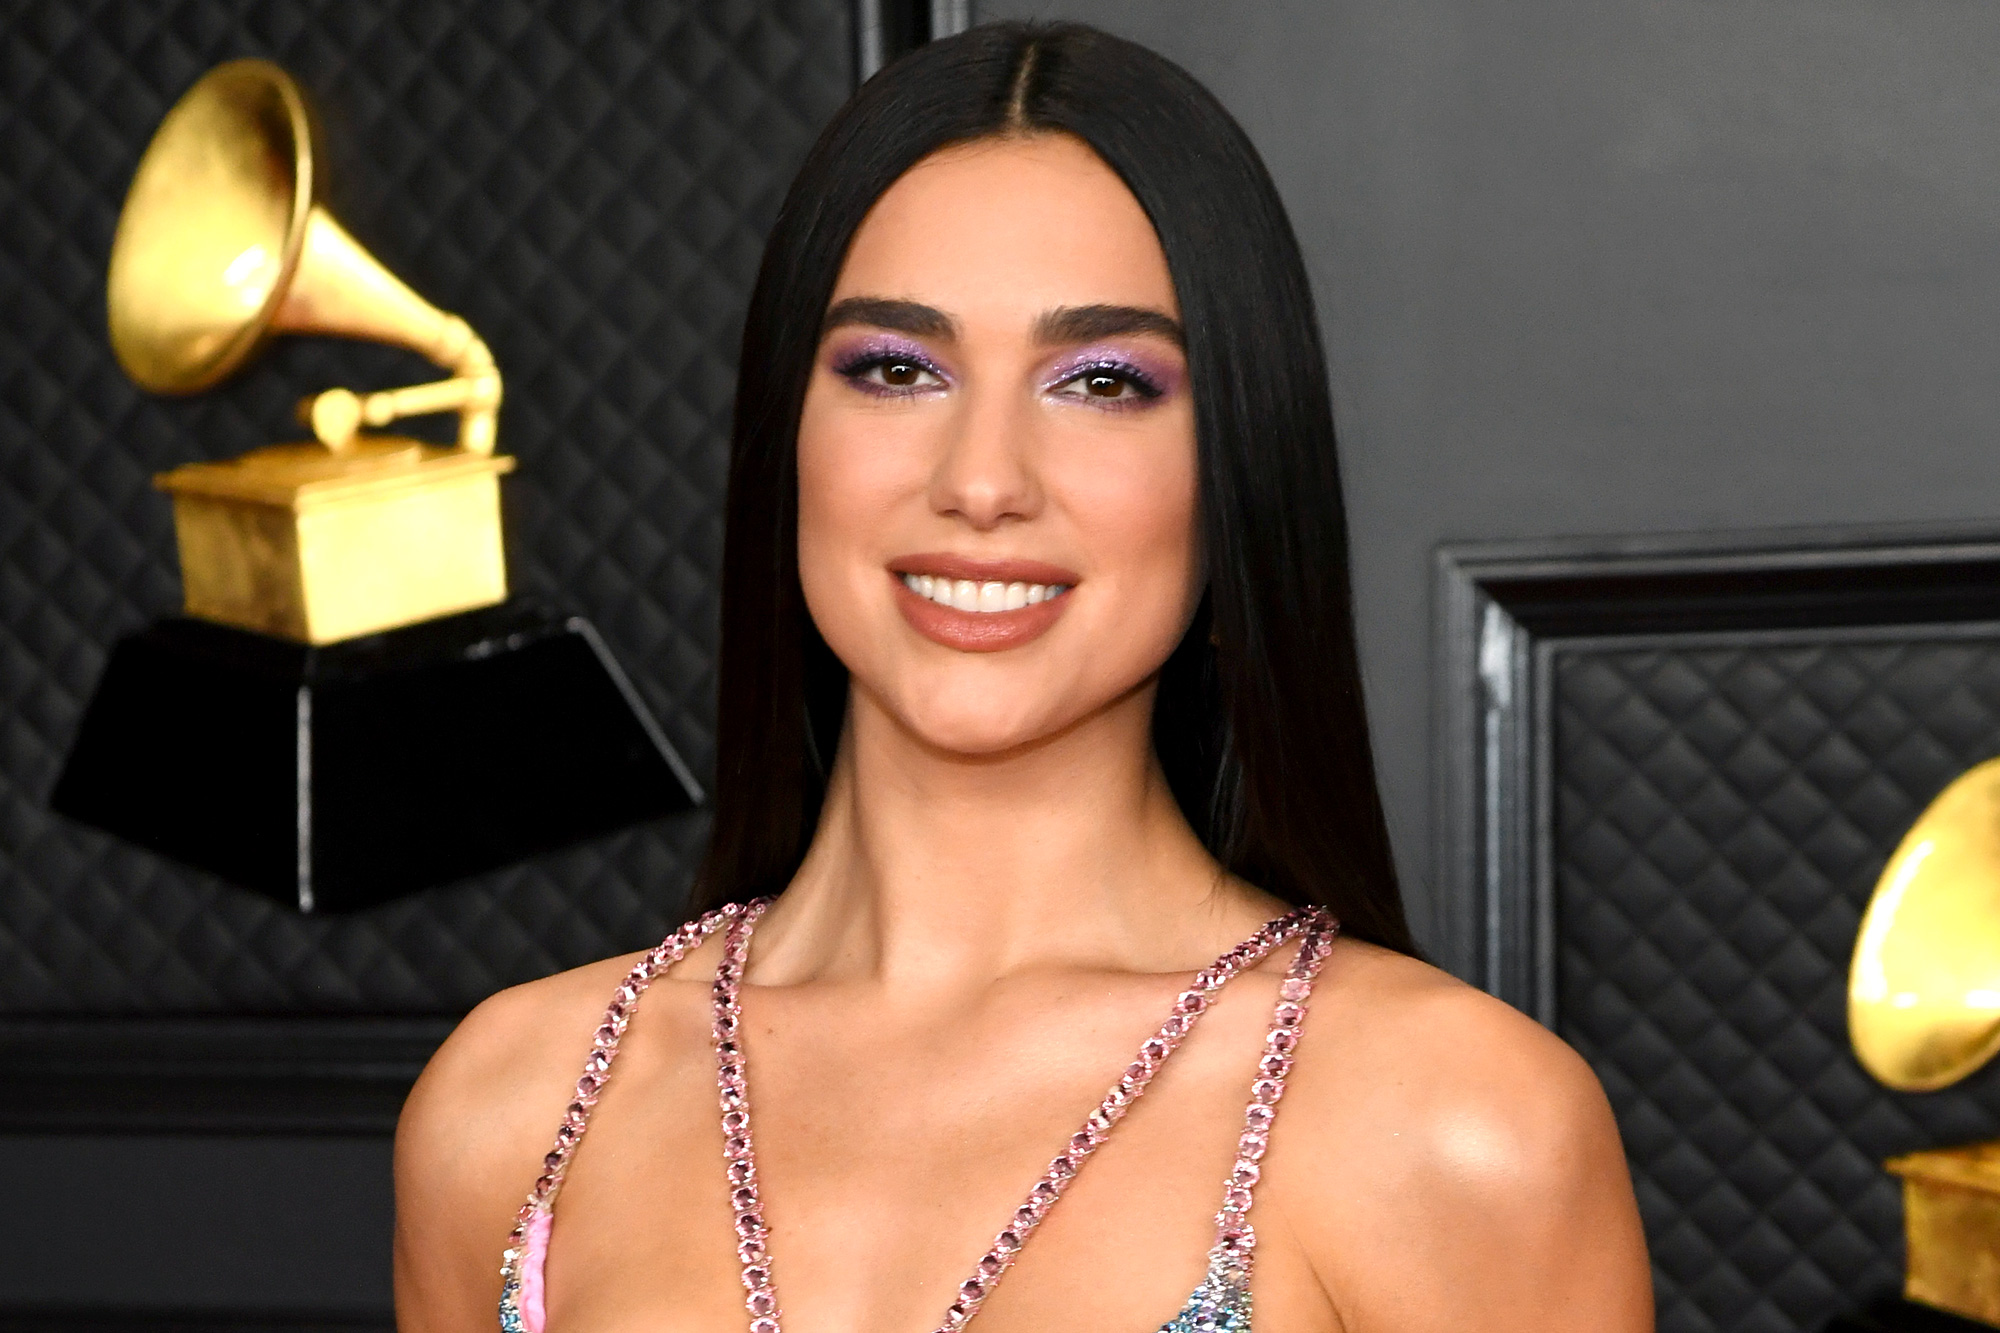 Dua Lipa Chooses Black Lacey Catsuit for Red Carpet: See Pics